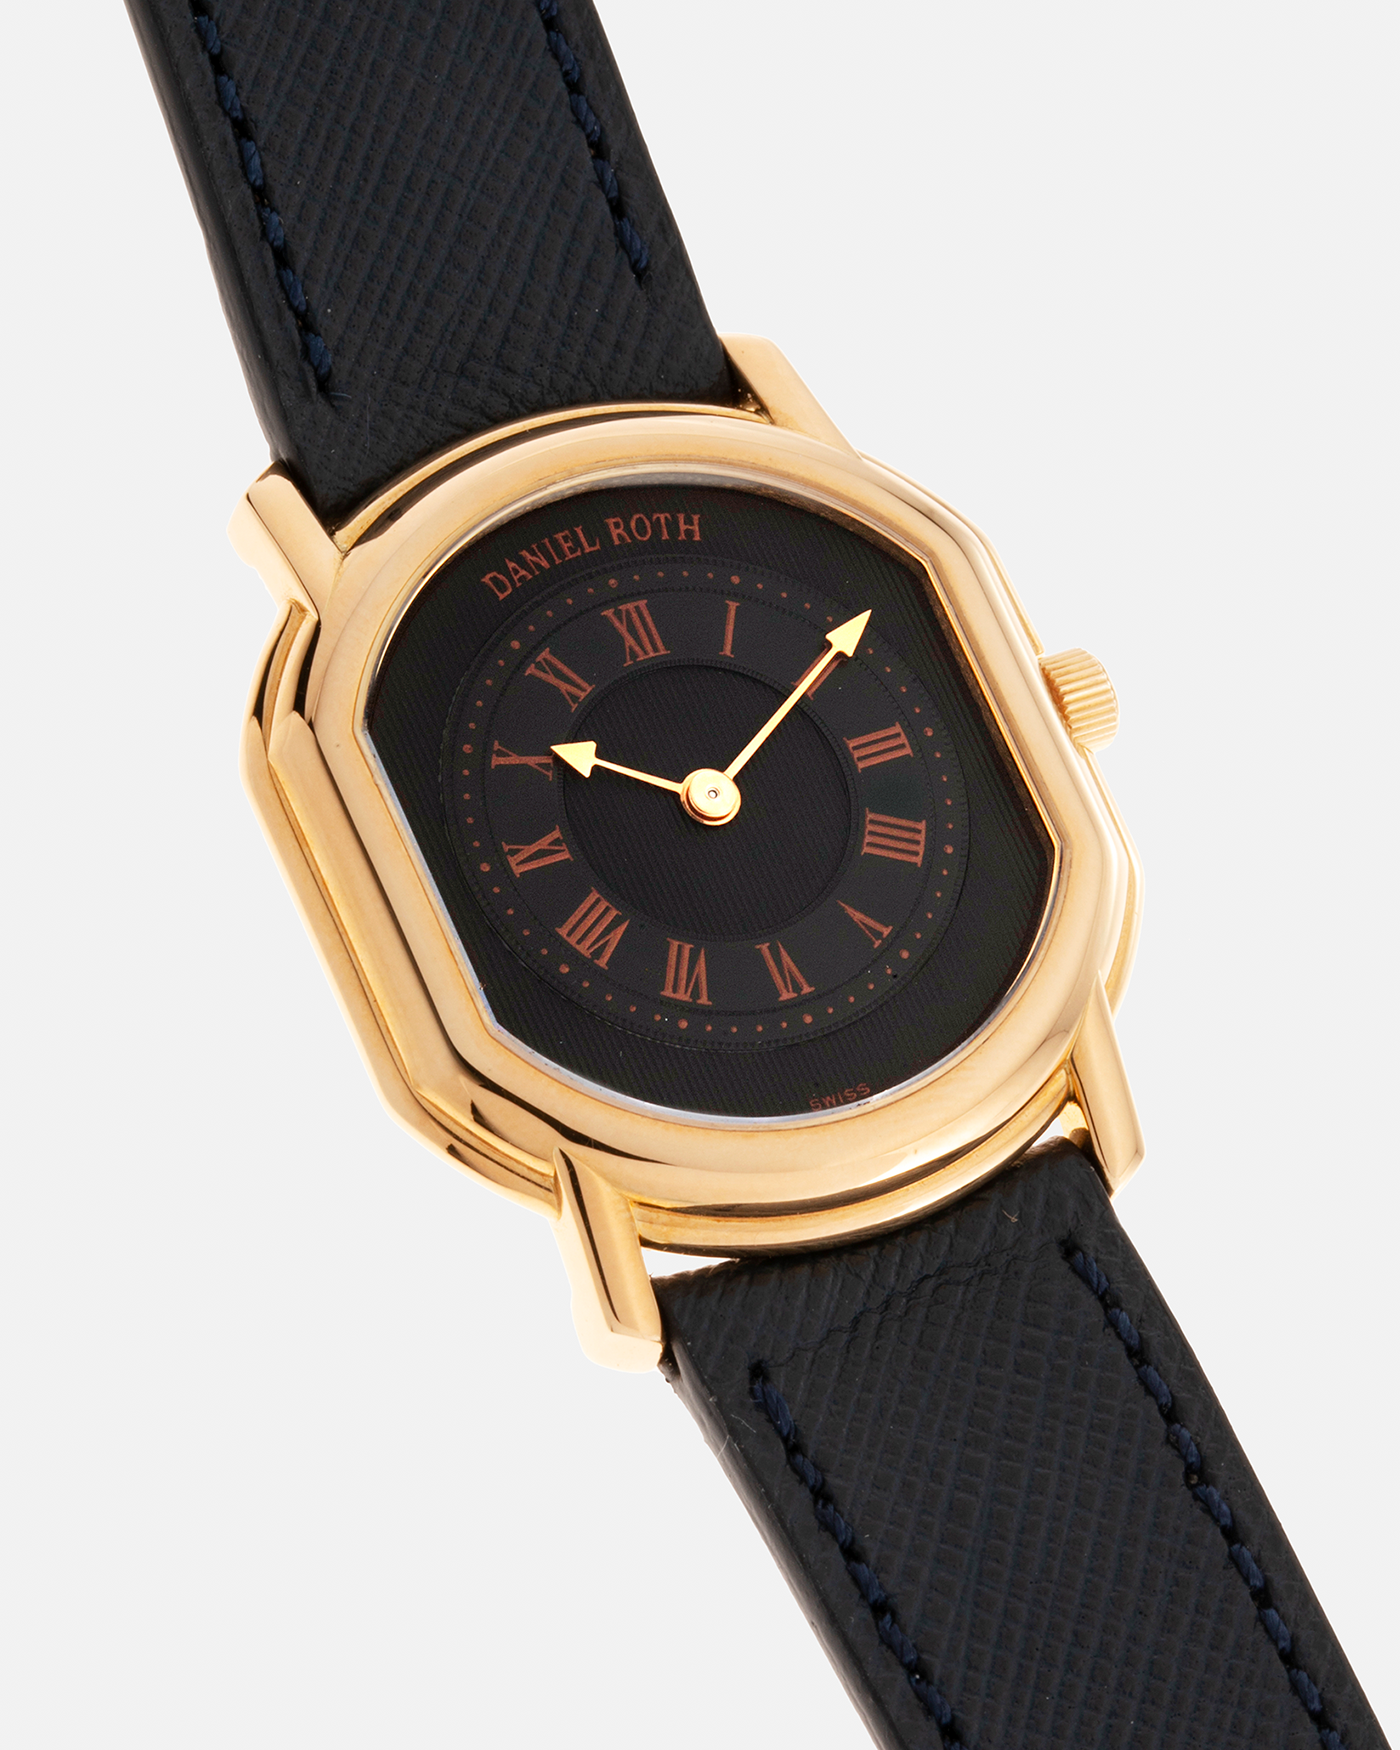 Brand: Daniel Roth Year: Early 1990s Model: Midi Plat Black Dial Reference Number: 2167 Material: 18-carat Yellow Gold  Movement: Daniel Roth Cal. 196, Manual-Winding Case Diameter: 37mm x 32mm Lug Width: 18mm Strap: Molequin Navy Textured Calf Leather Strap with Signed 18-carat Yellow Gold Tang Buckle